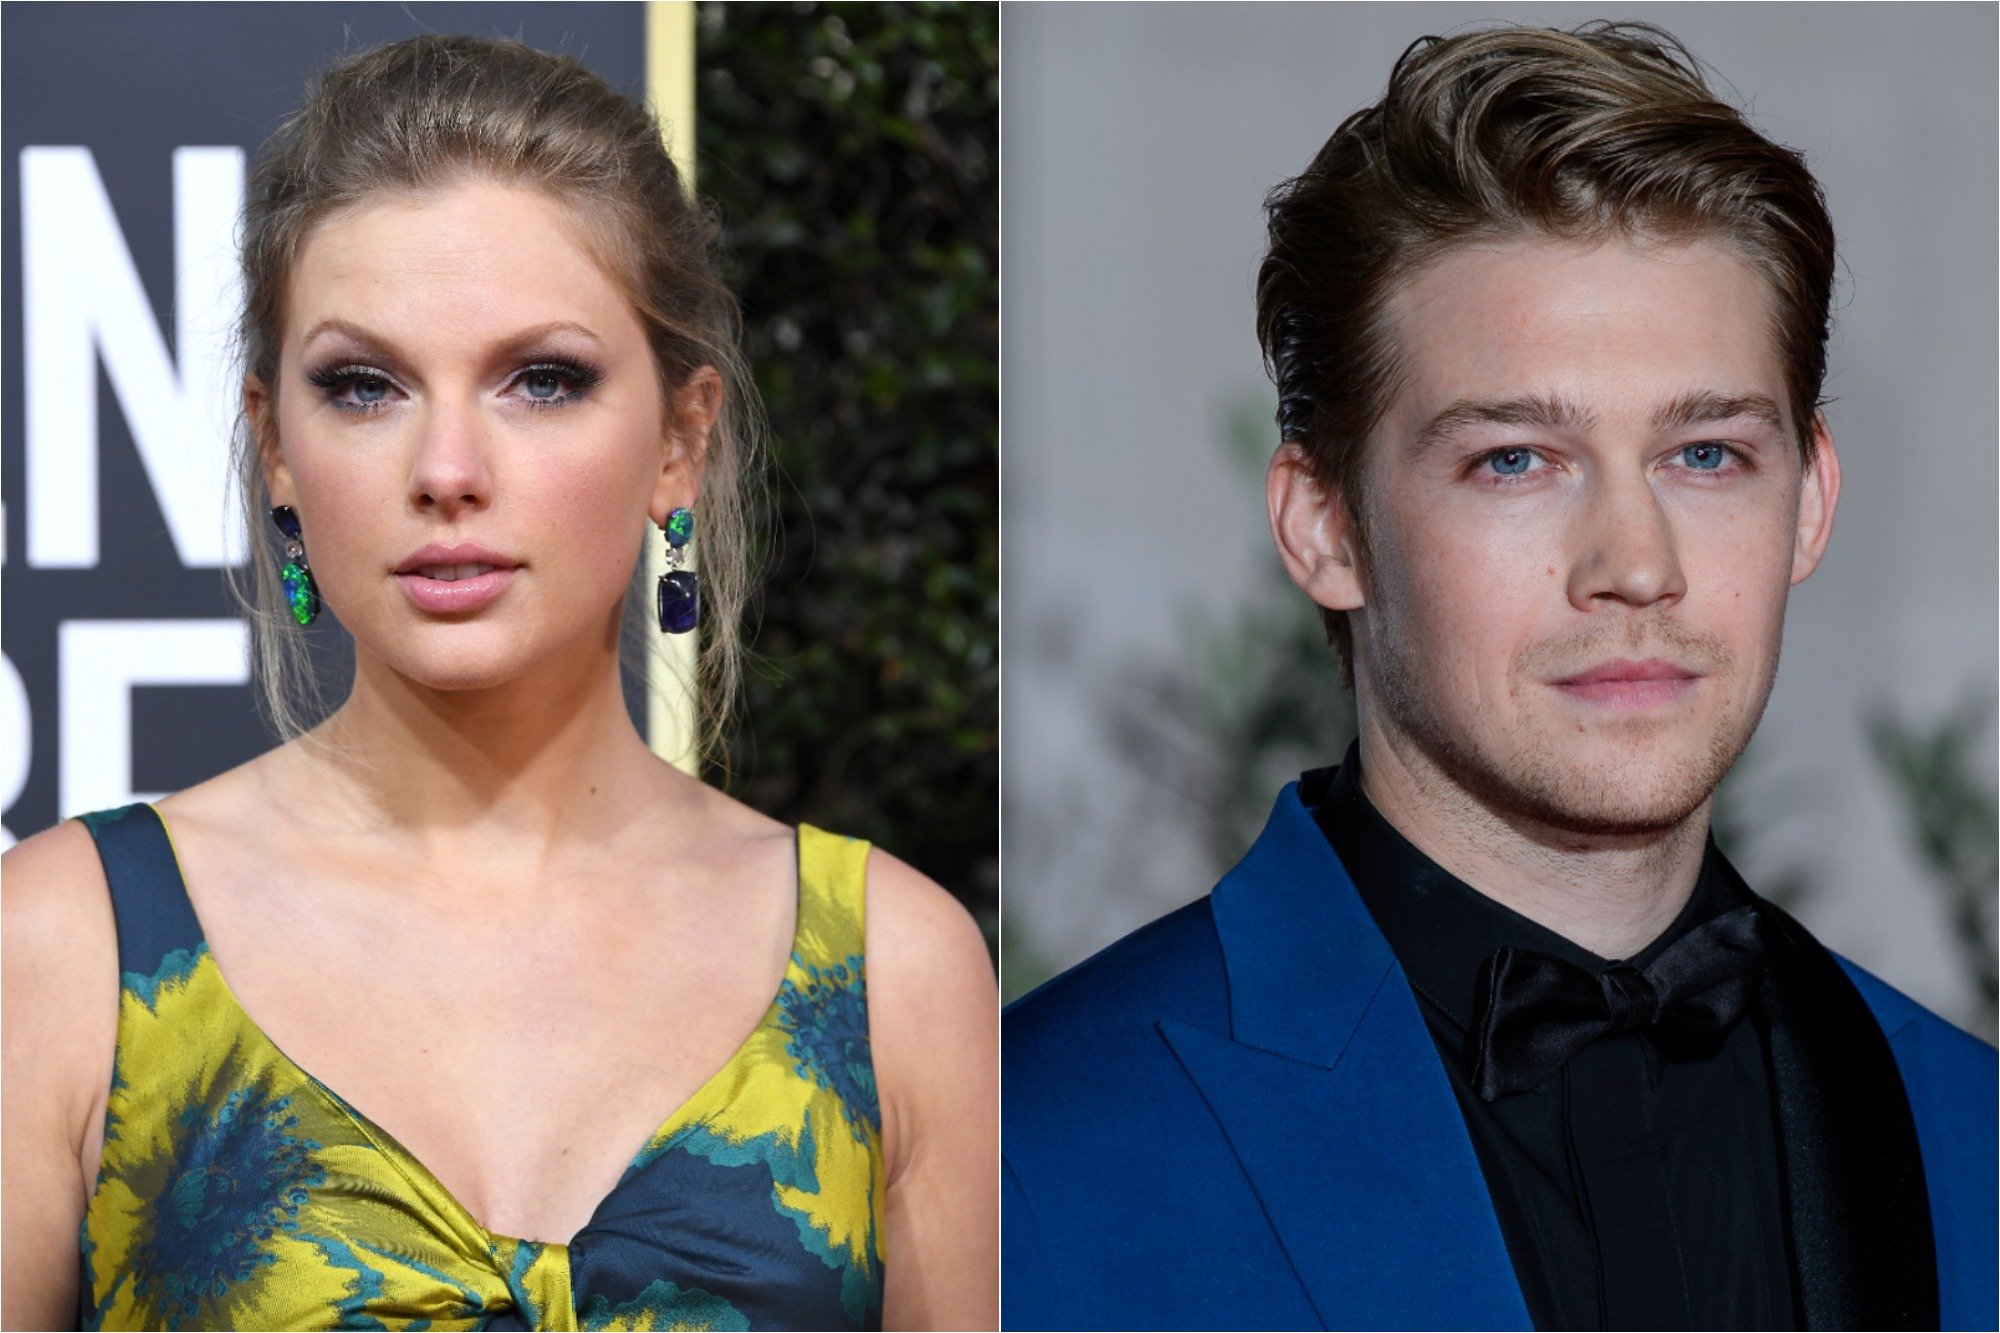 Did Taylor Swift Just Use a Pseudonym For Joe Alwyn? Fans Think He’s a Co-Writer on Her New Album, ‘folklore’